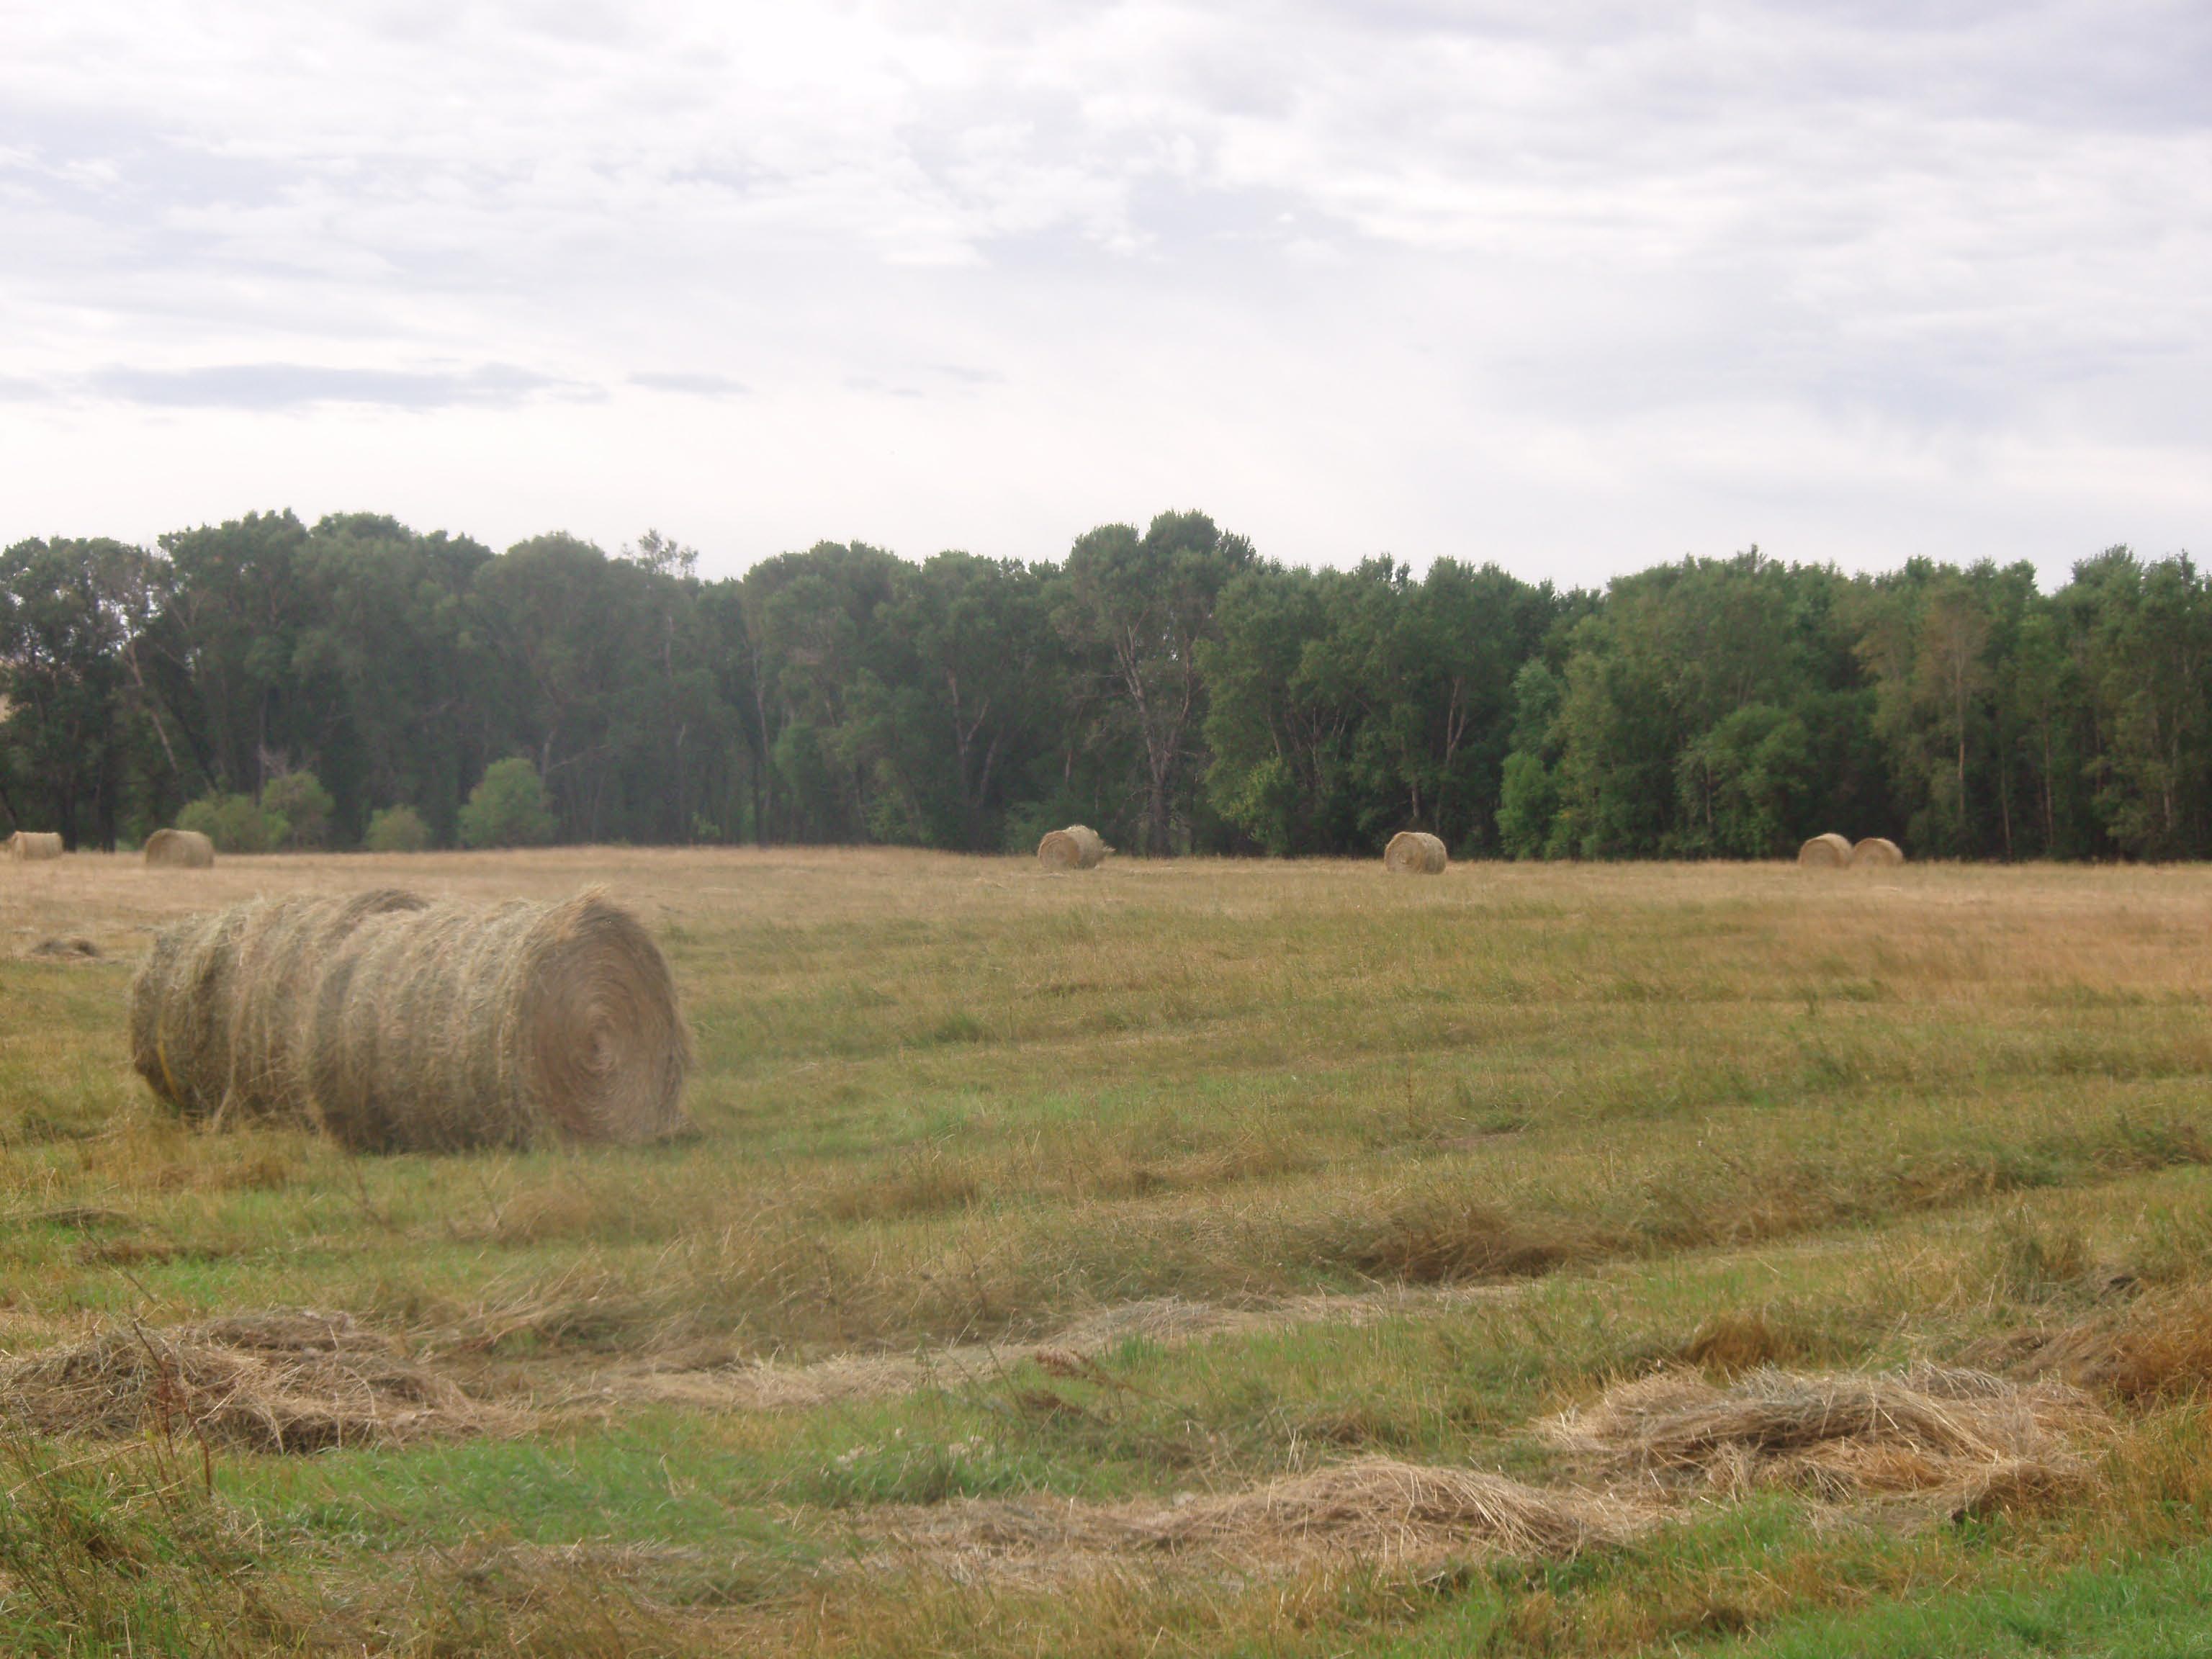 Hay Season Soon to Arrive- Glenn Selk Ponders How Much Hay Will That Mama Cow Require